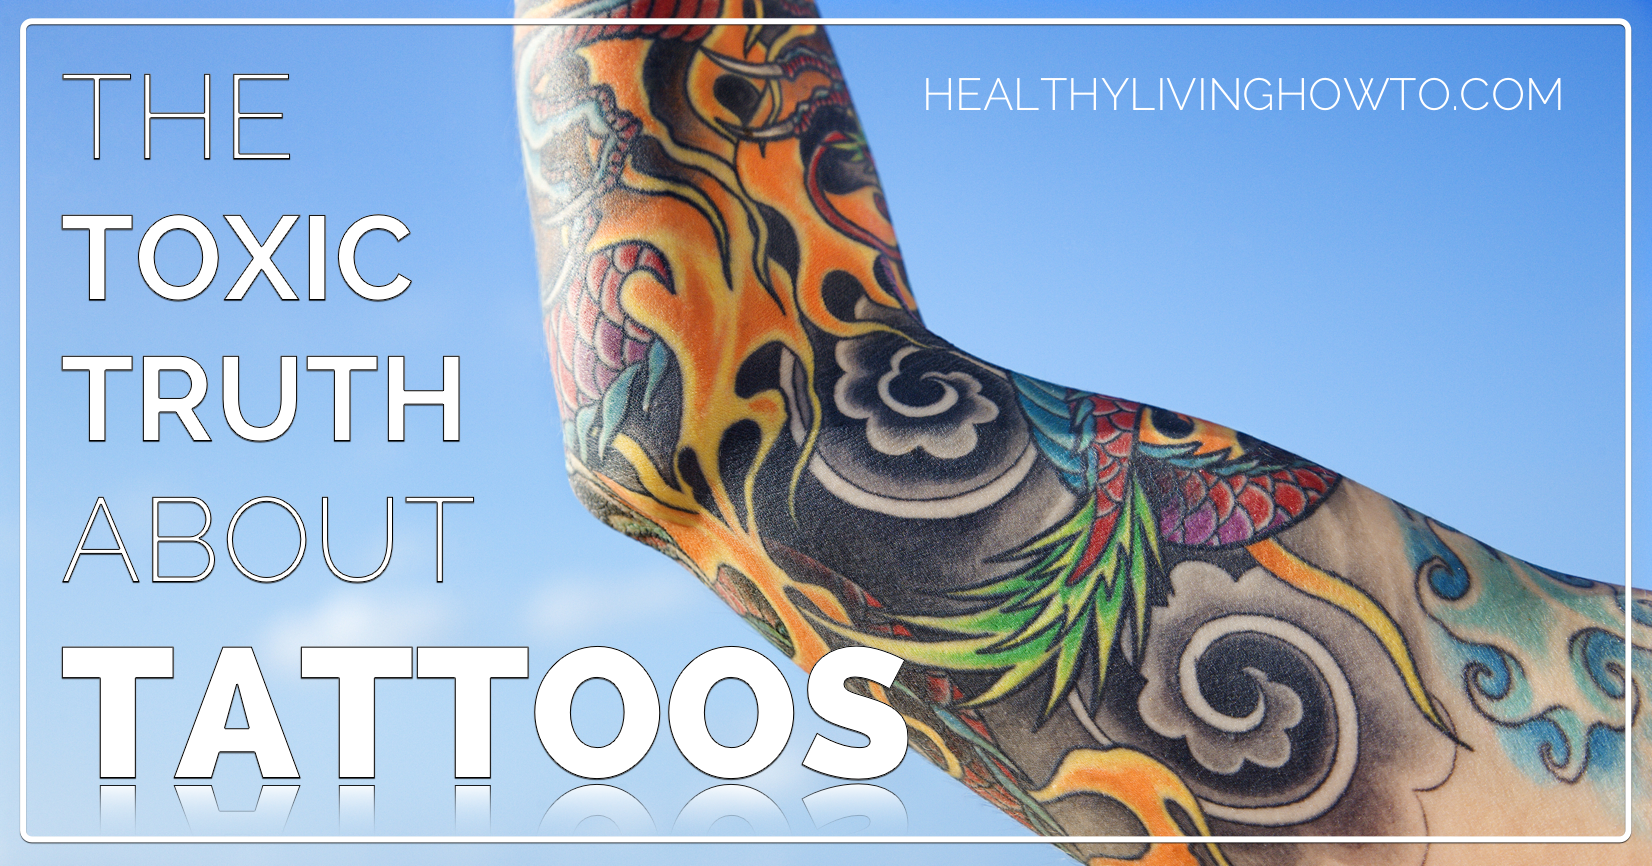 The Toxic Truth About Tattoos | healthylivinghowto.com